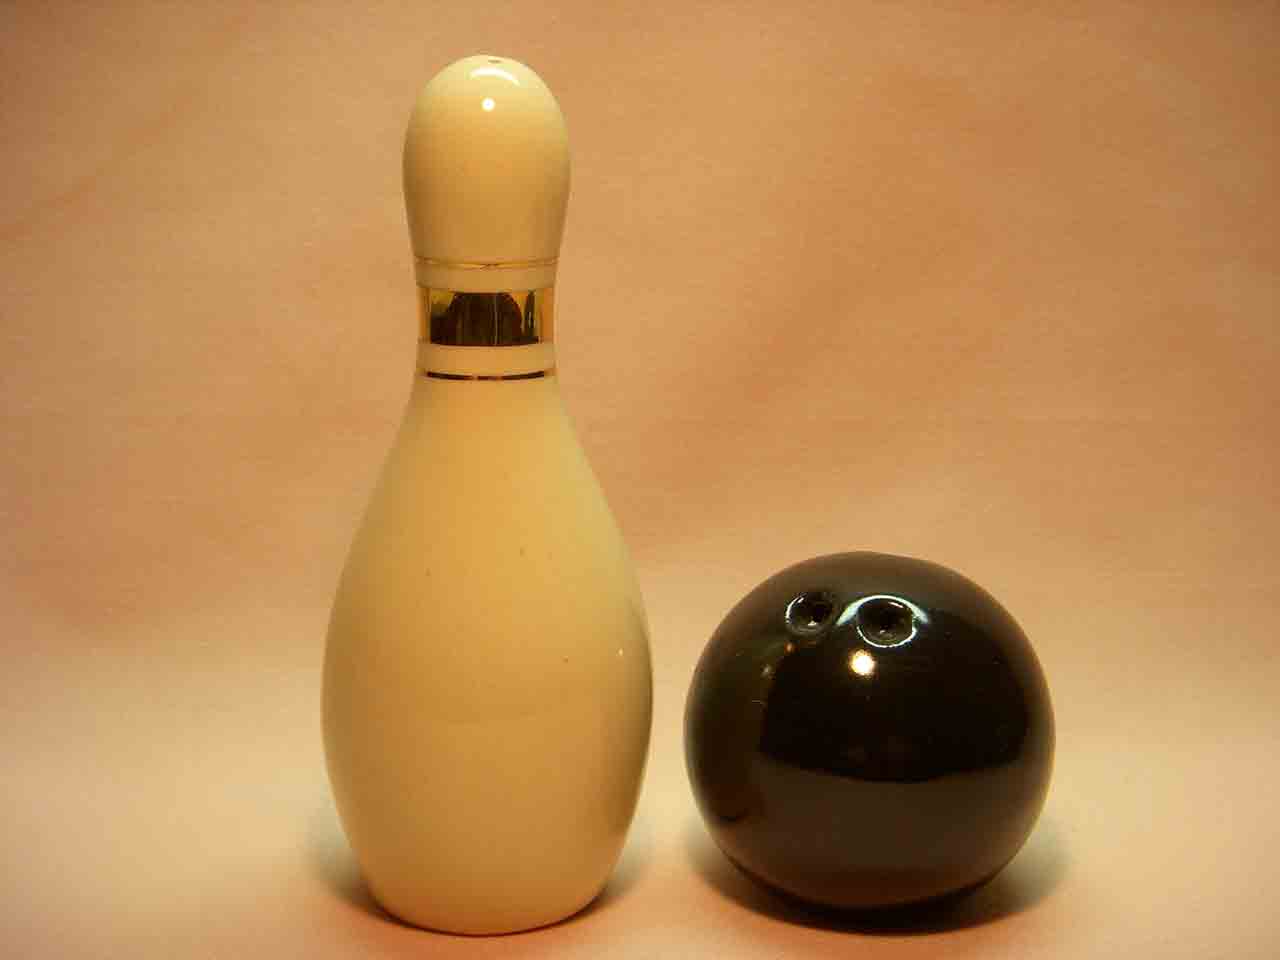 Vallona Starr ten pin and bowling ball salt and pepper shakers